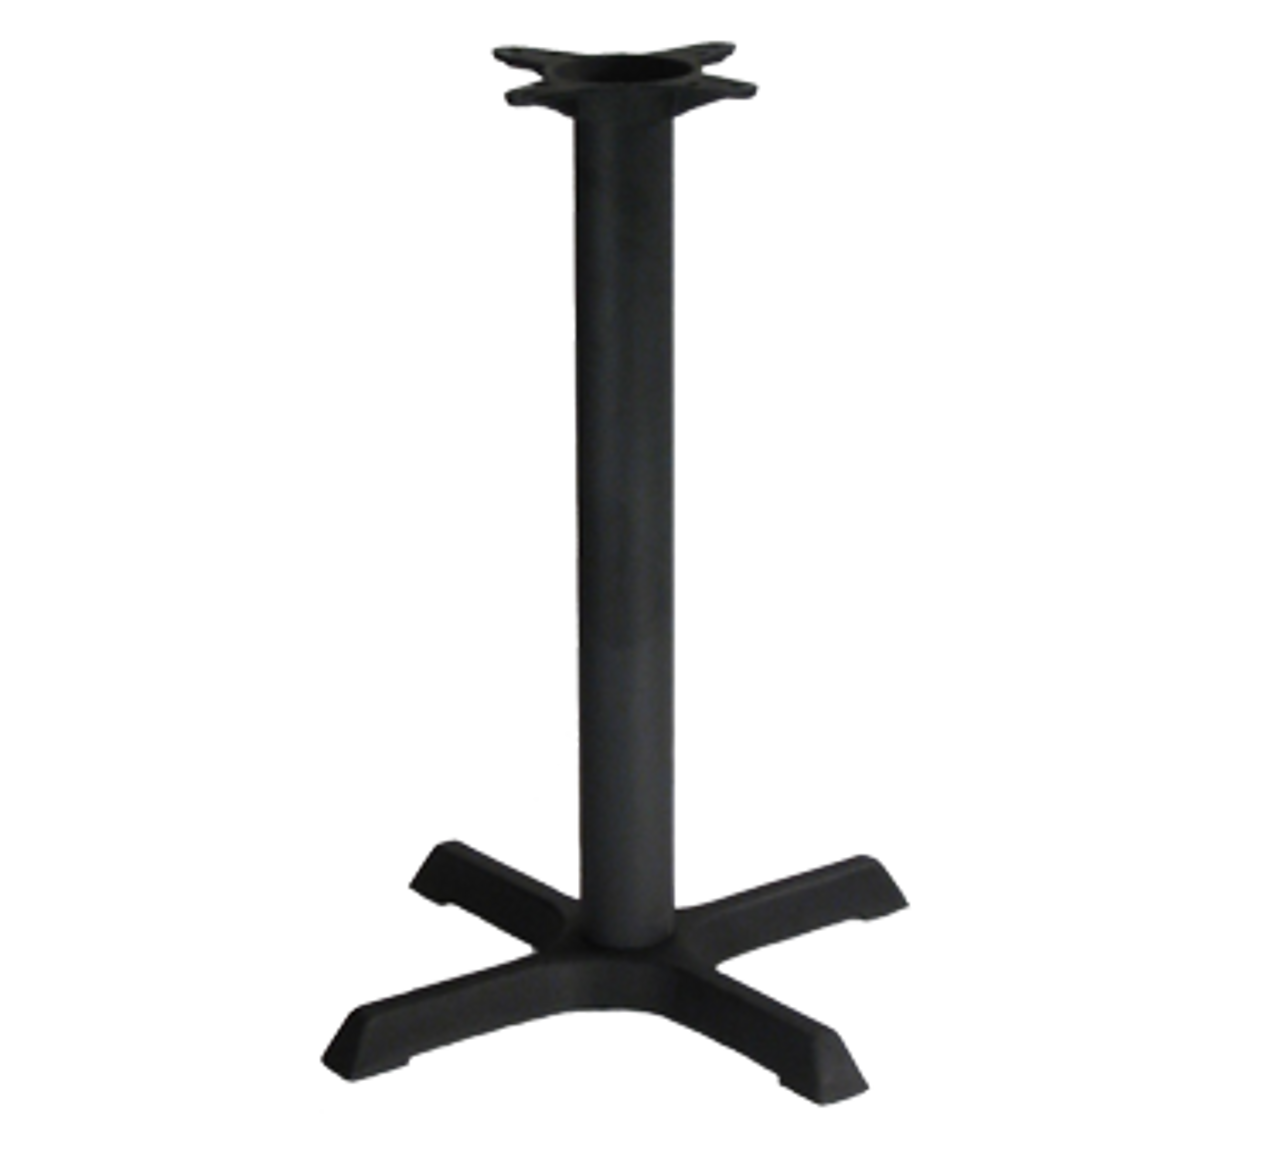 Table Base, indoor, 22" x 22" base spread, 3" dia. column, dining height, stamped steel, black powder coat finish  (2 week lead time)